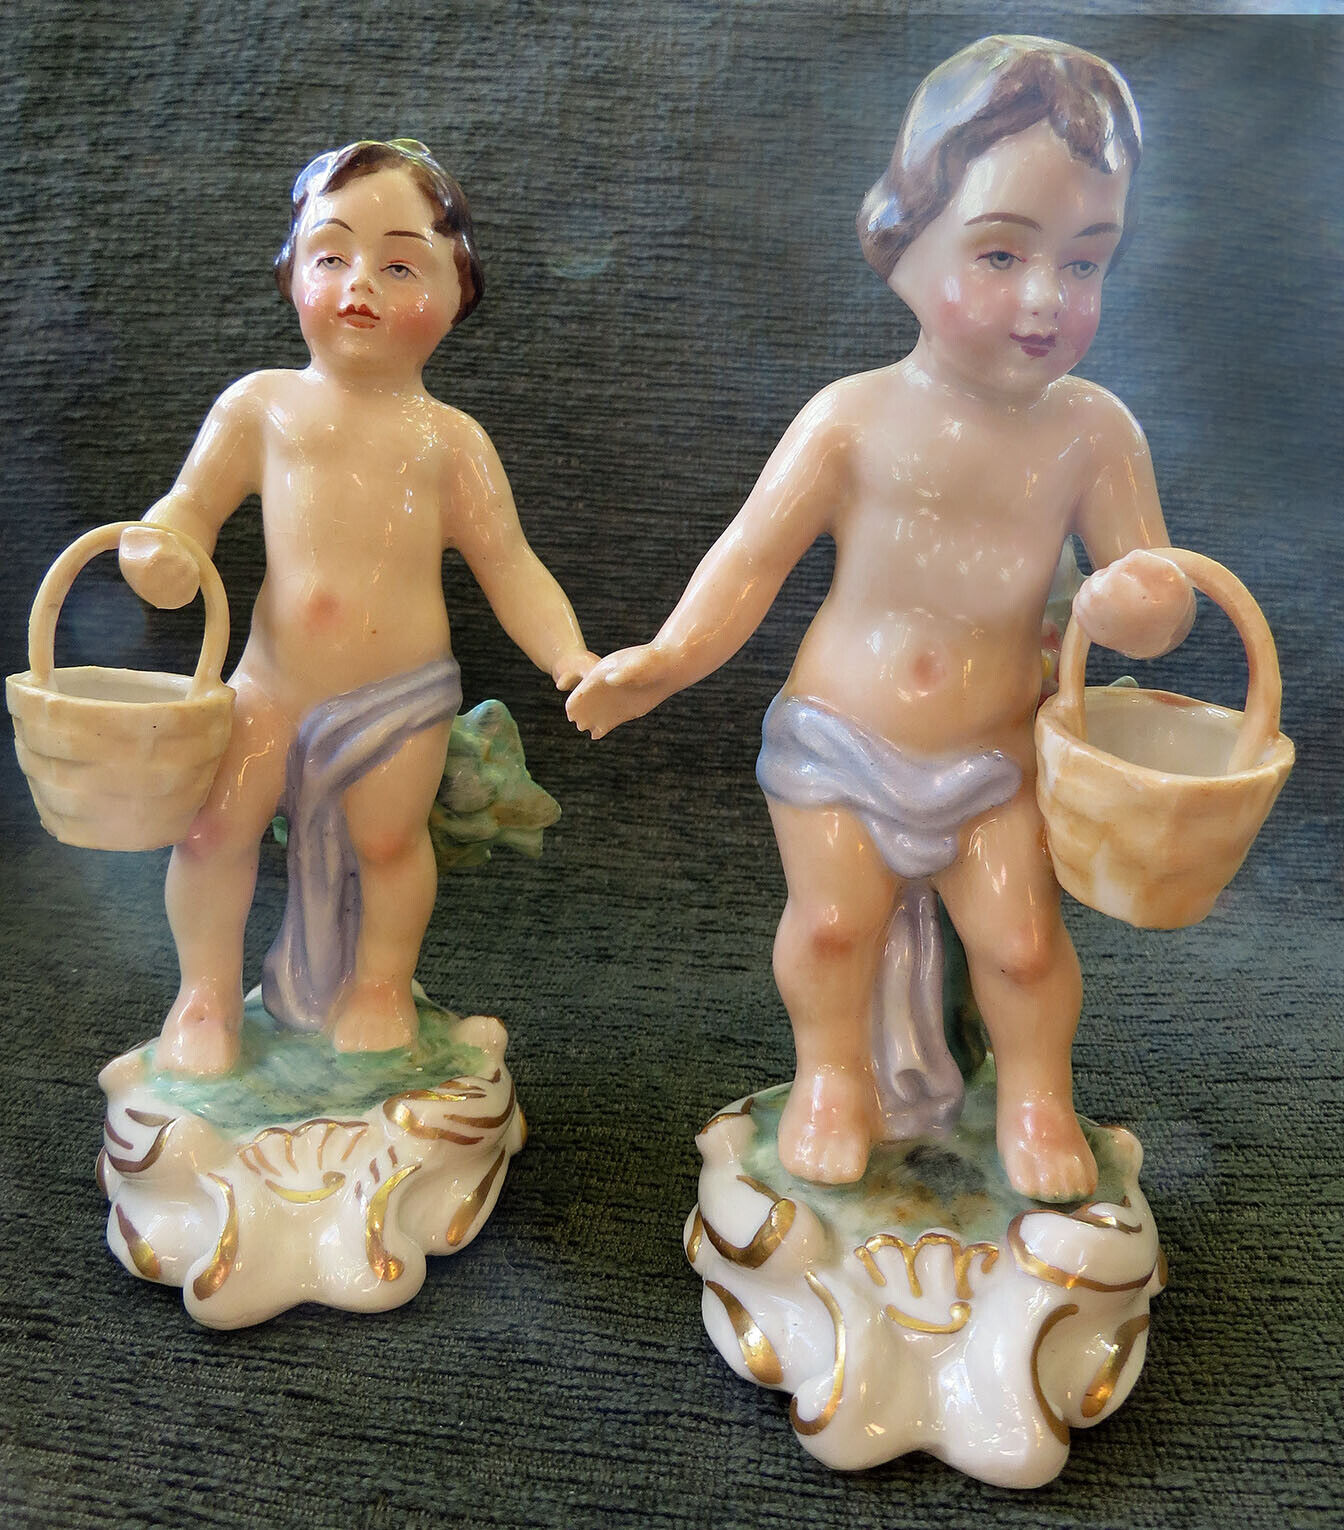 Rare Antique Matched Pair 1944 JABESON PORCELAIN Boy with a Basket Figurines